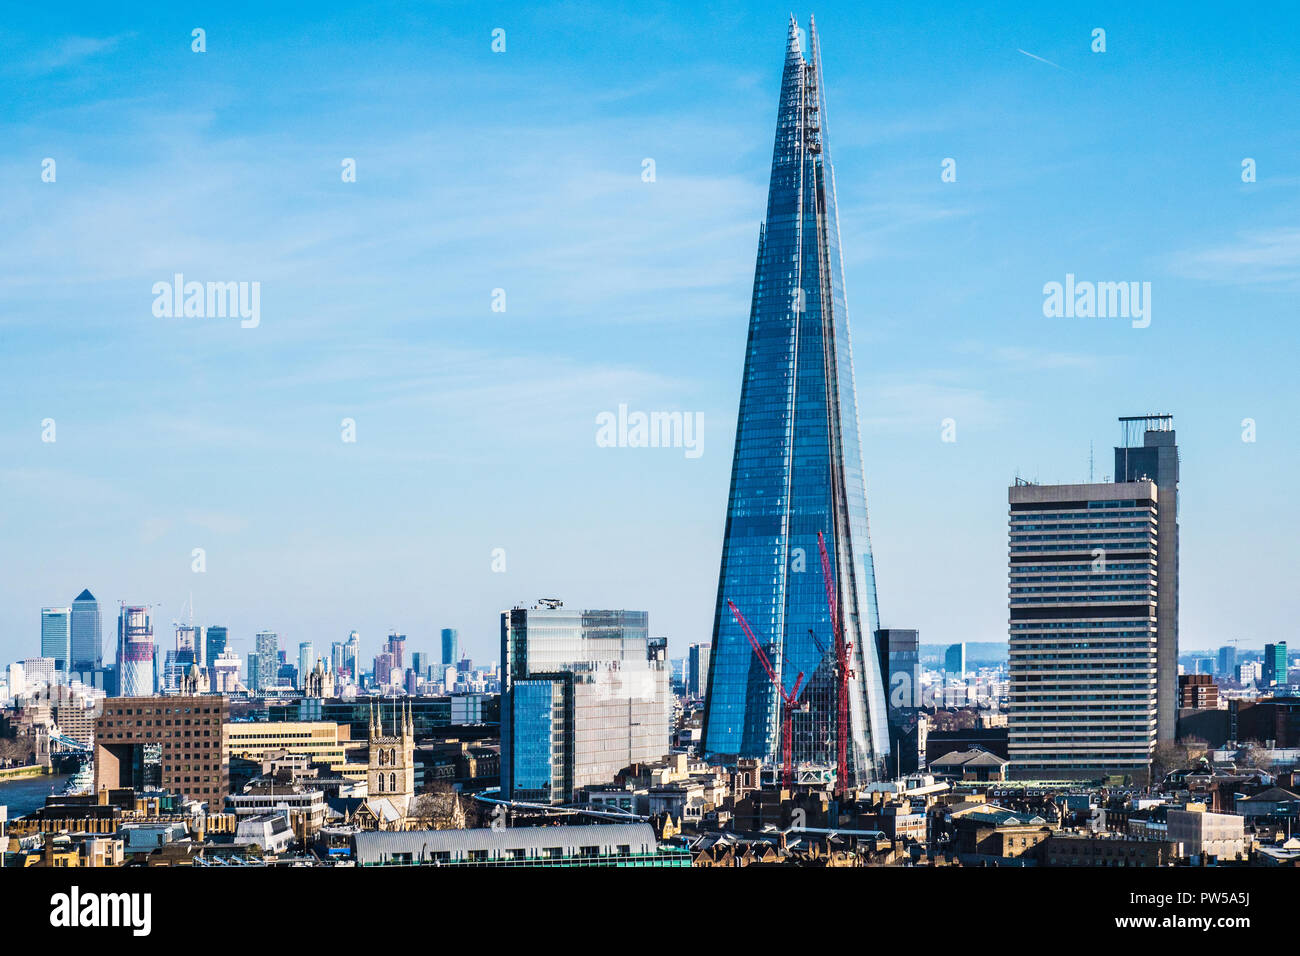 The London skyline with the iconic Shard building seen from the Tate Modern. Stock Photo